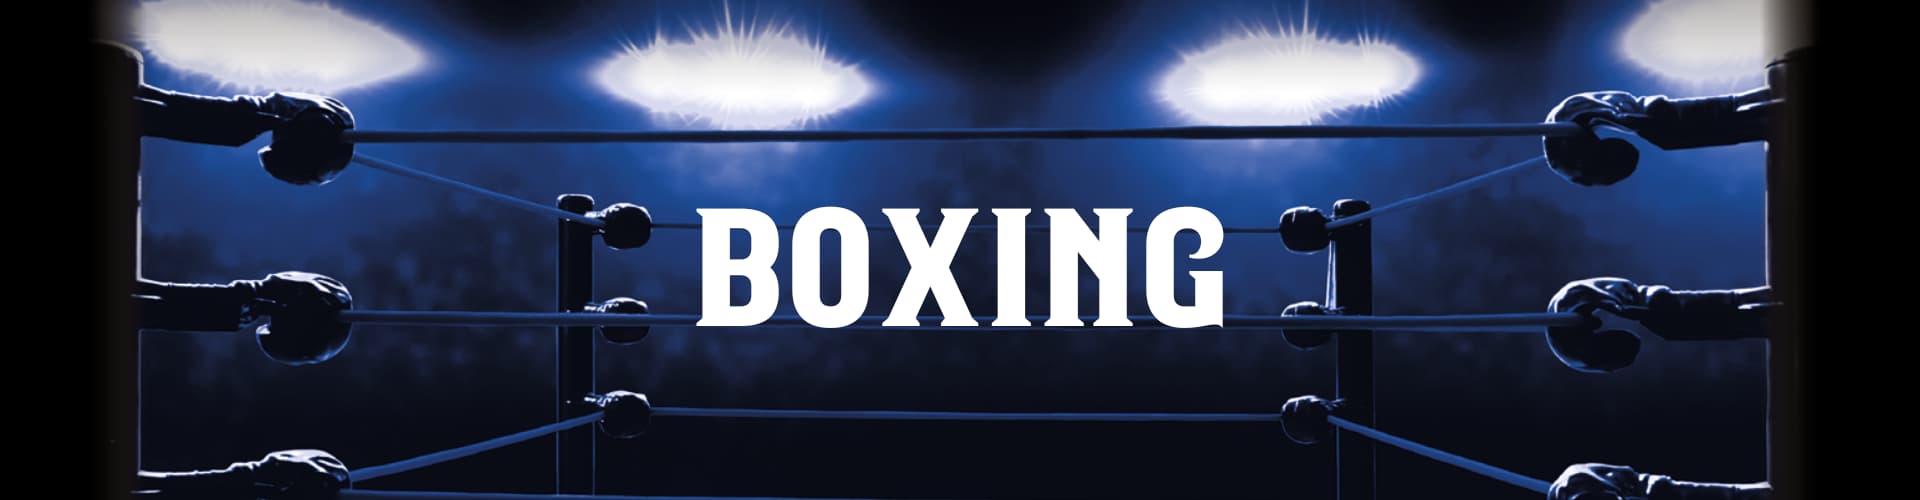 Watch Live Boxing in London at The George Pub